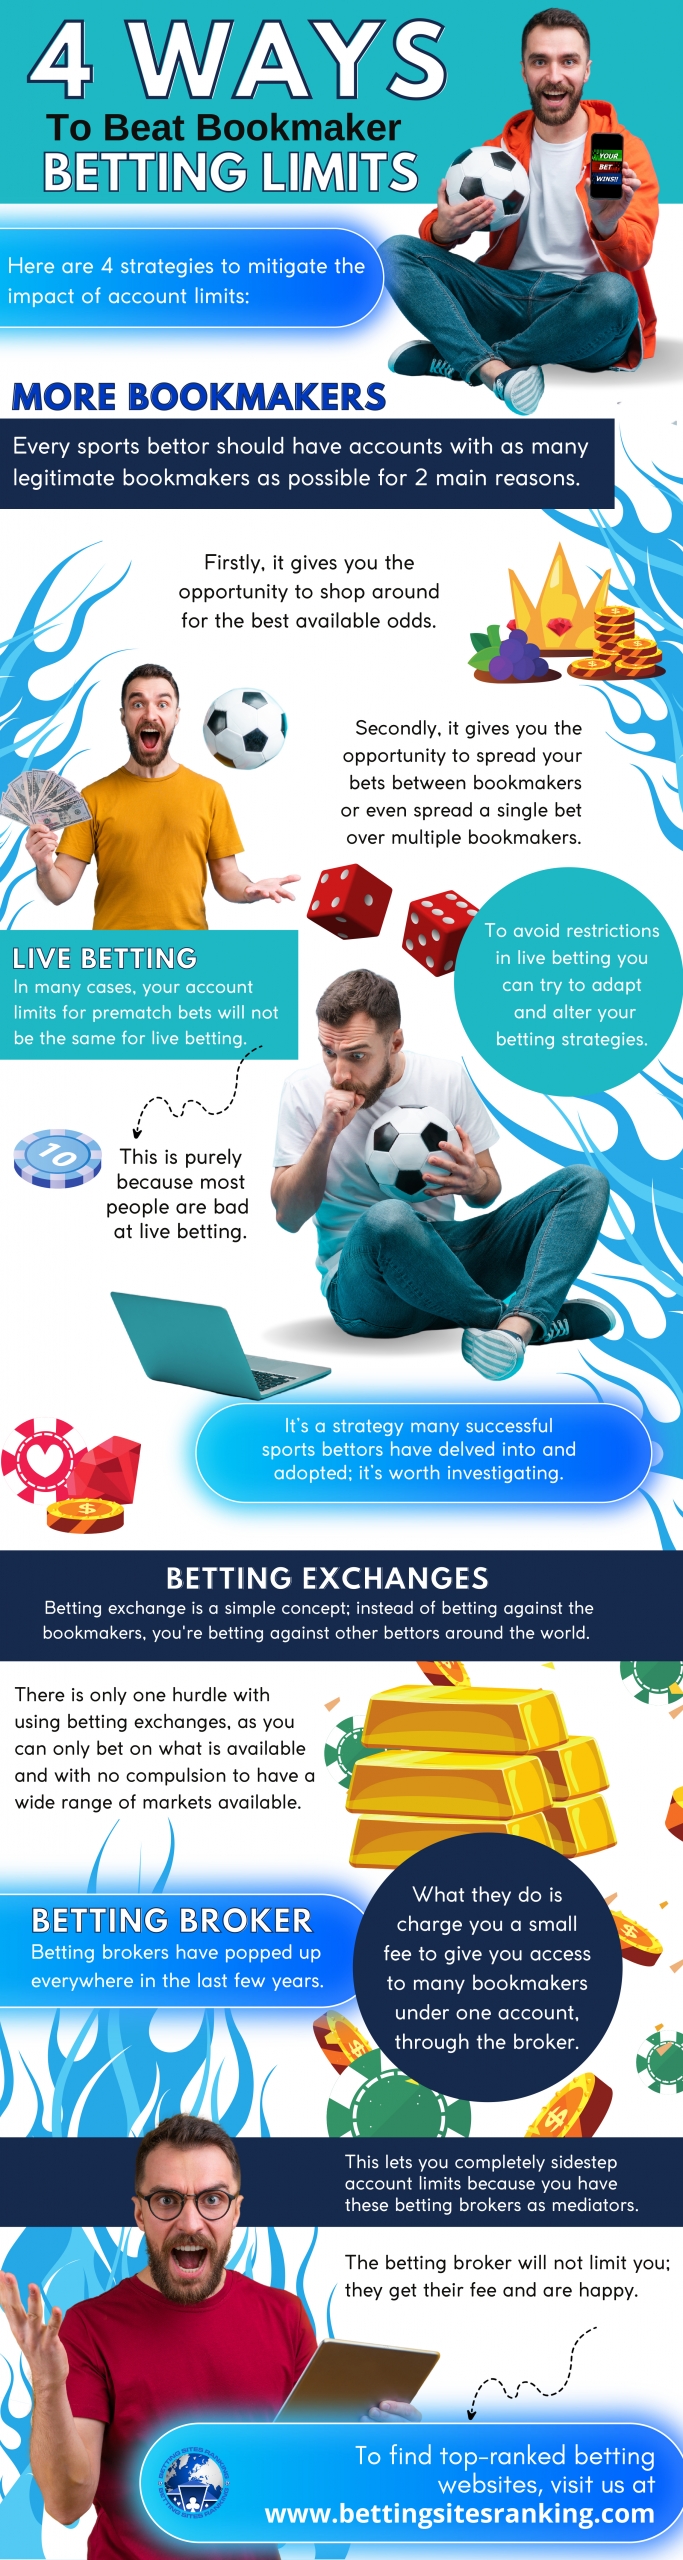 4-ways-to-beat-bookmaker-betting-limits